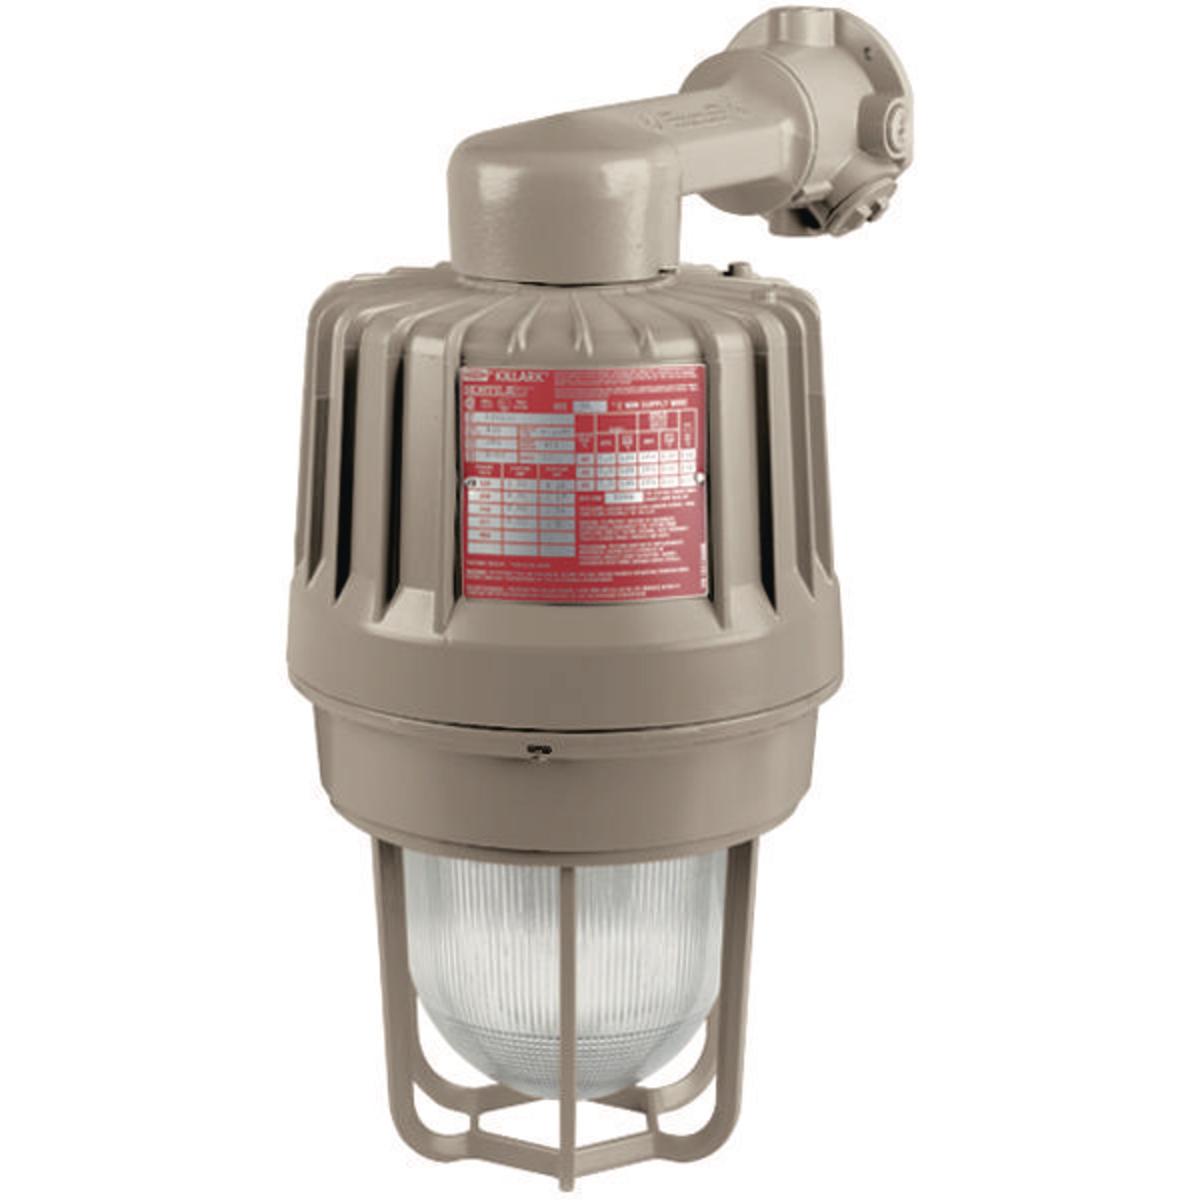 Hubbell EZS050B2G HID 50W Quadri-Volt High Pressure Sodium 3/4" Wall Mount with Guard  ; Three light sources – High Pressure Sodium (50-400W), Metal Halide (70-400W) and Pulse Start Metal Halide (175-400W) ; Mounting choice –Pendant, ceiling, 25˚ stanchion or 90˚ wall moun